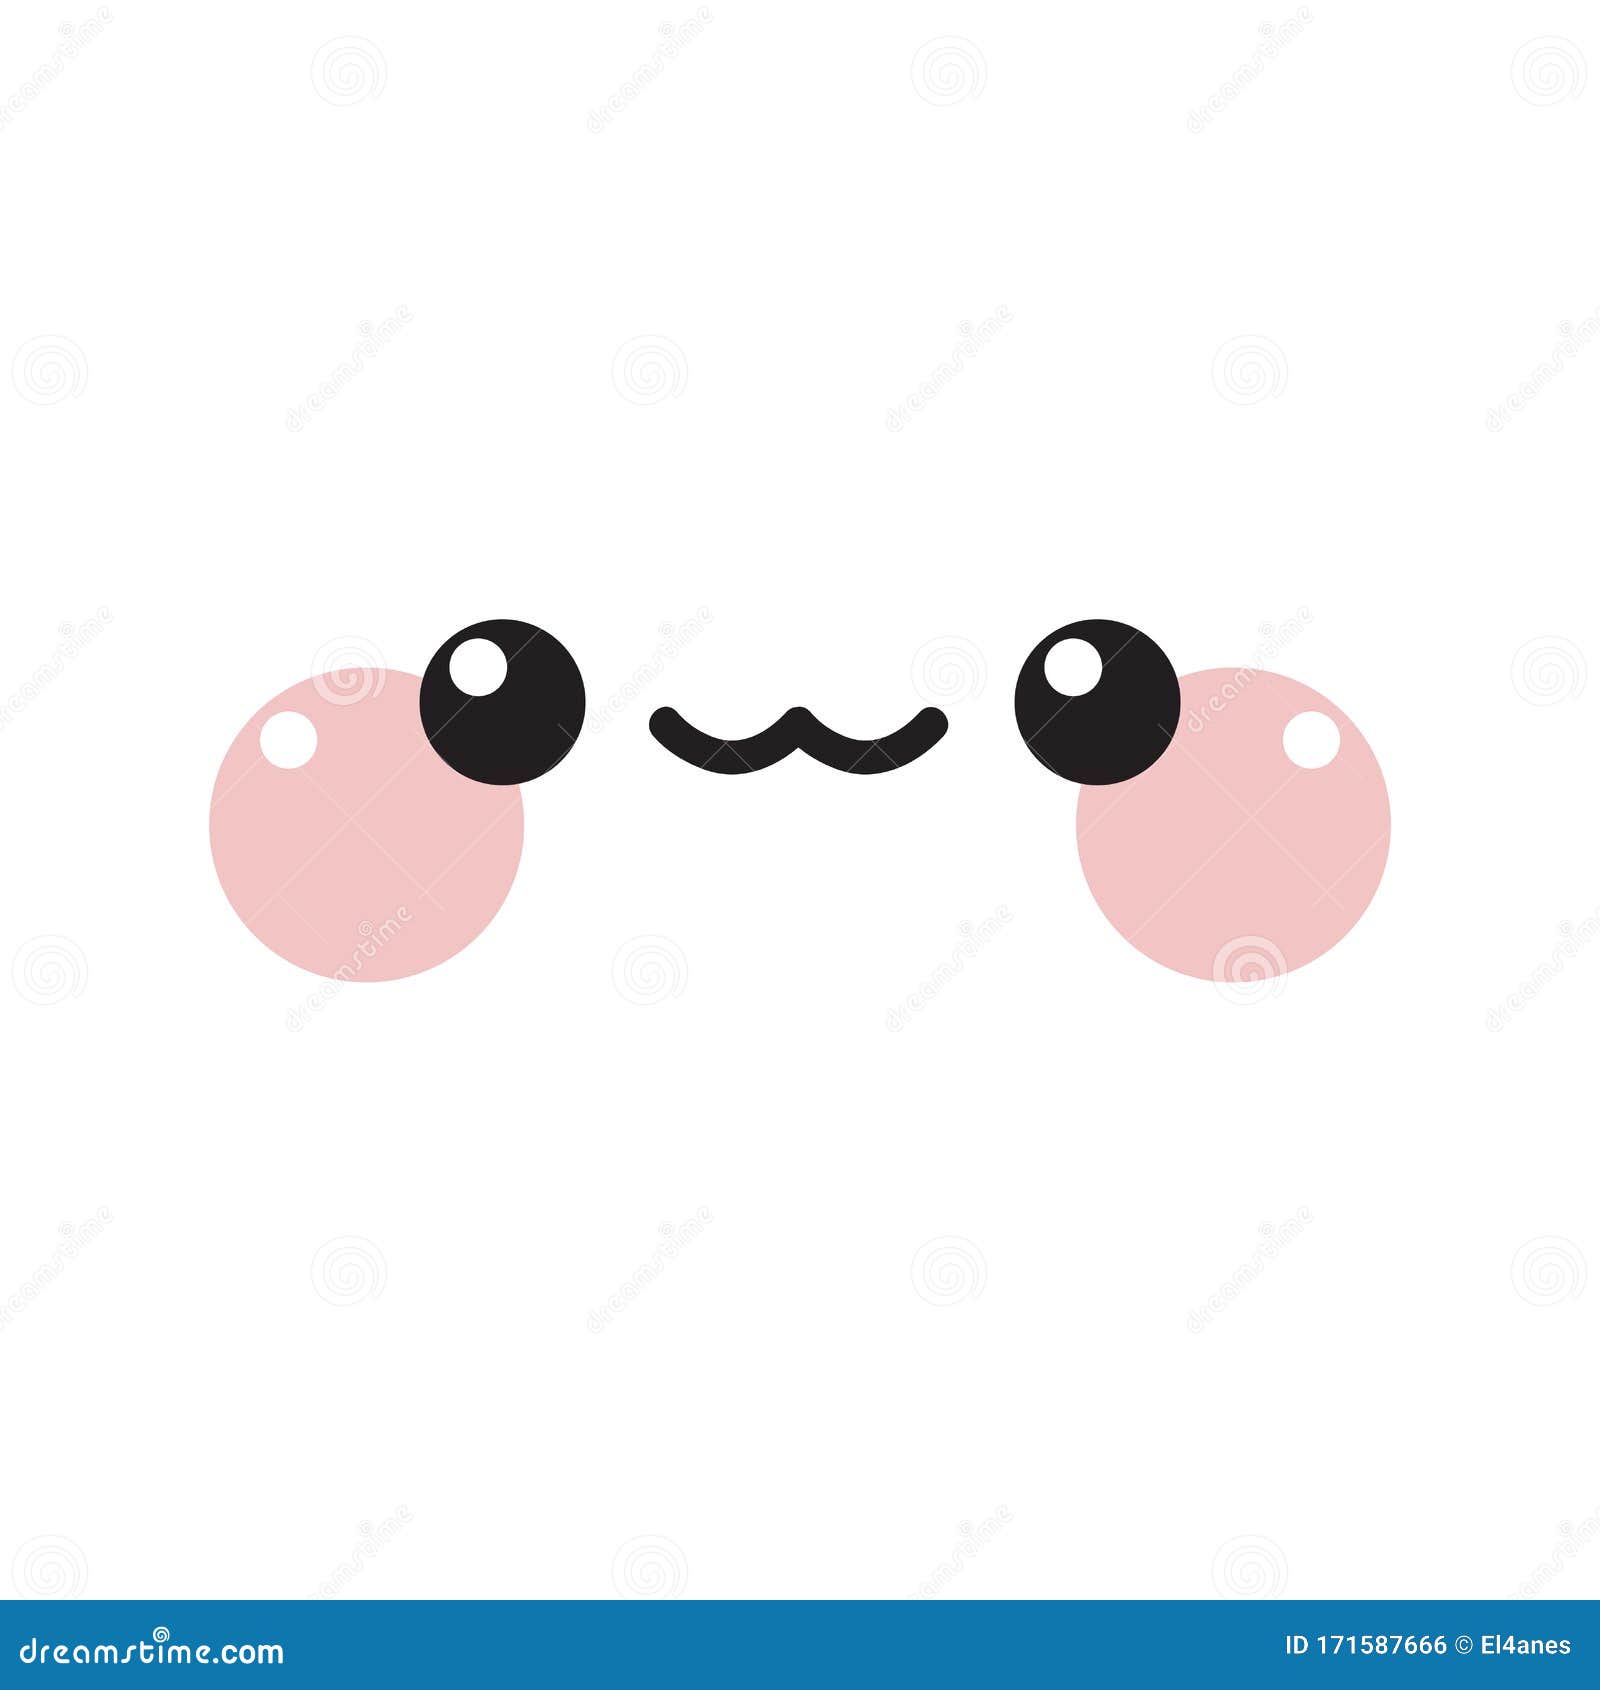 Cute Cartoon Face with Smile Stock Vector - Illustration of animal, cute:  171587666